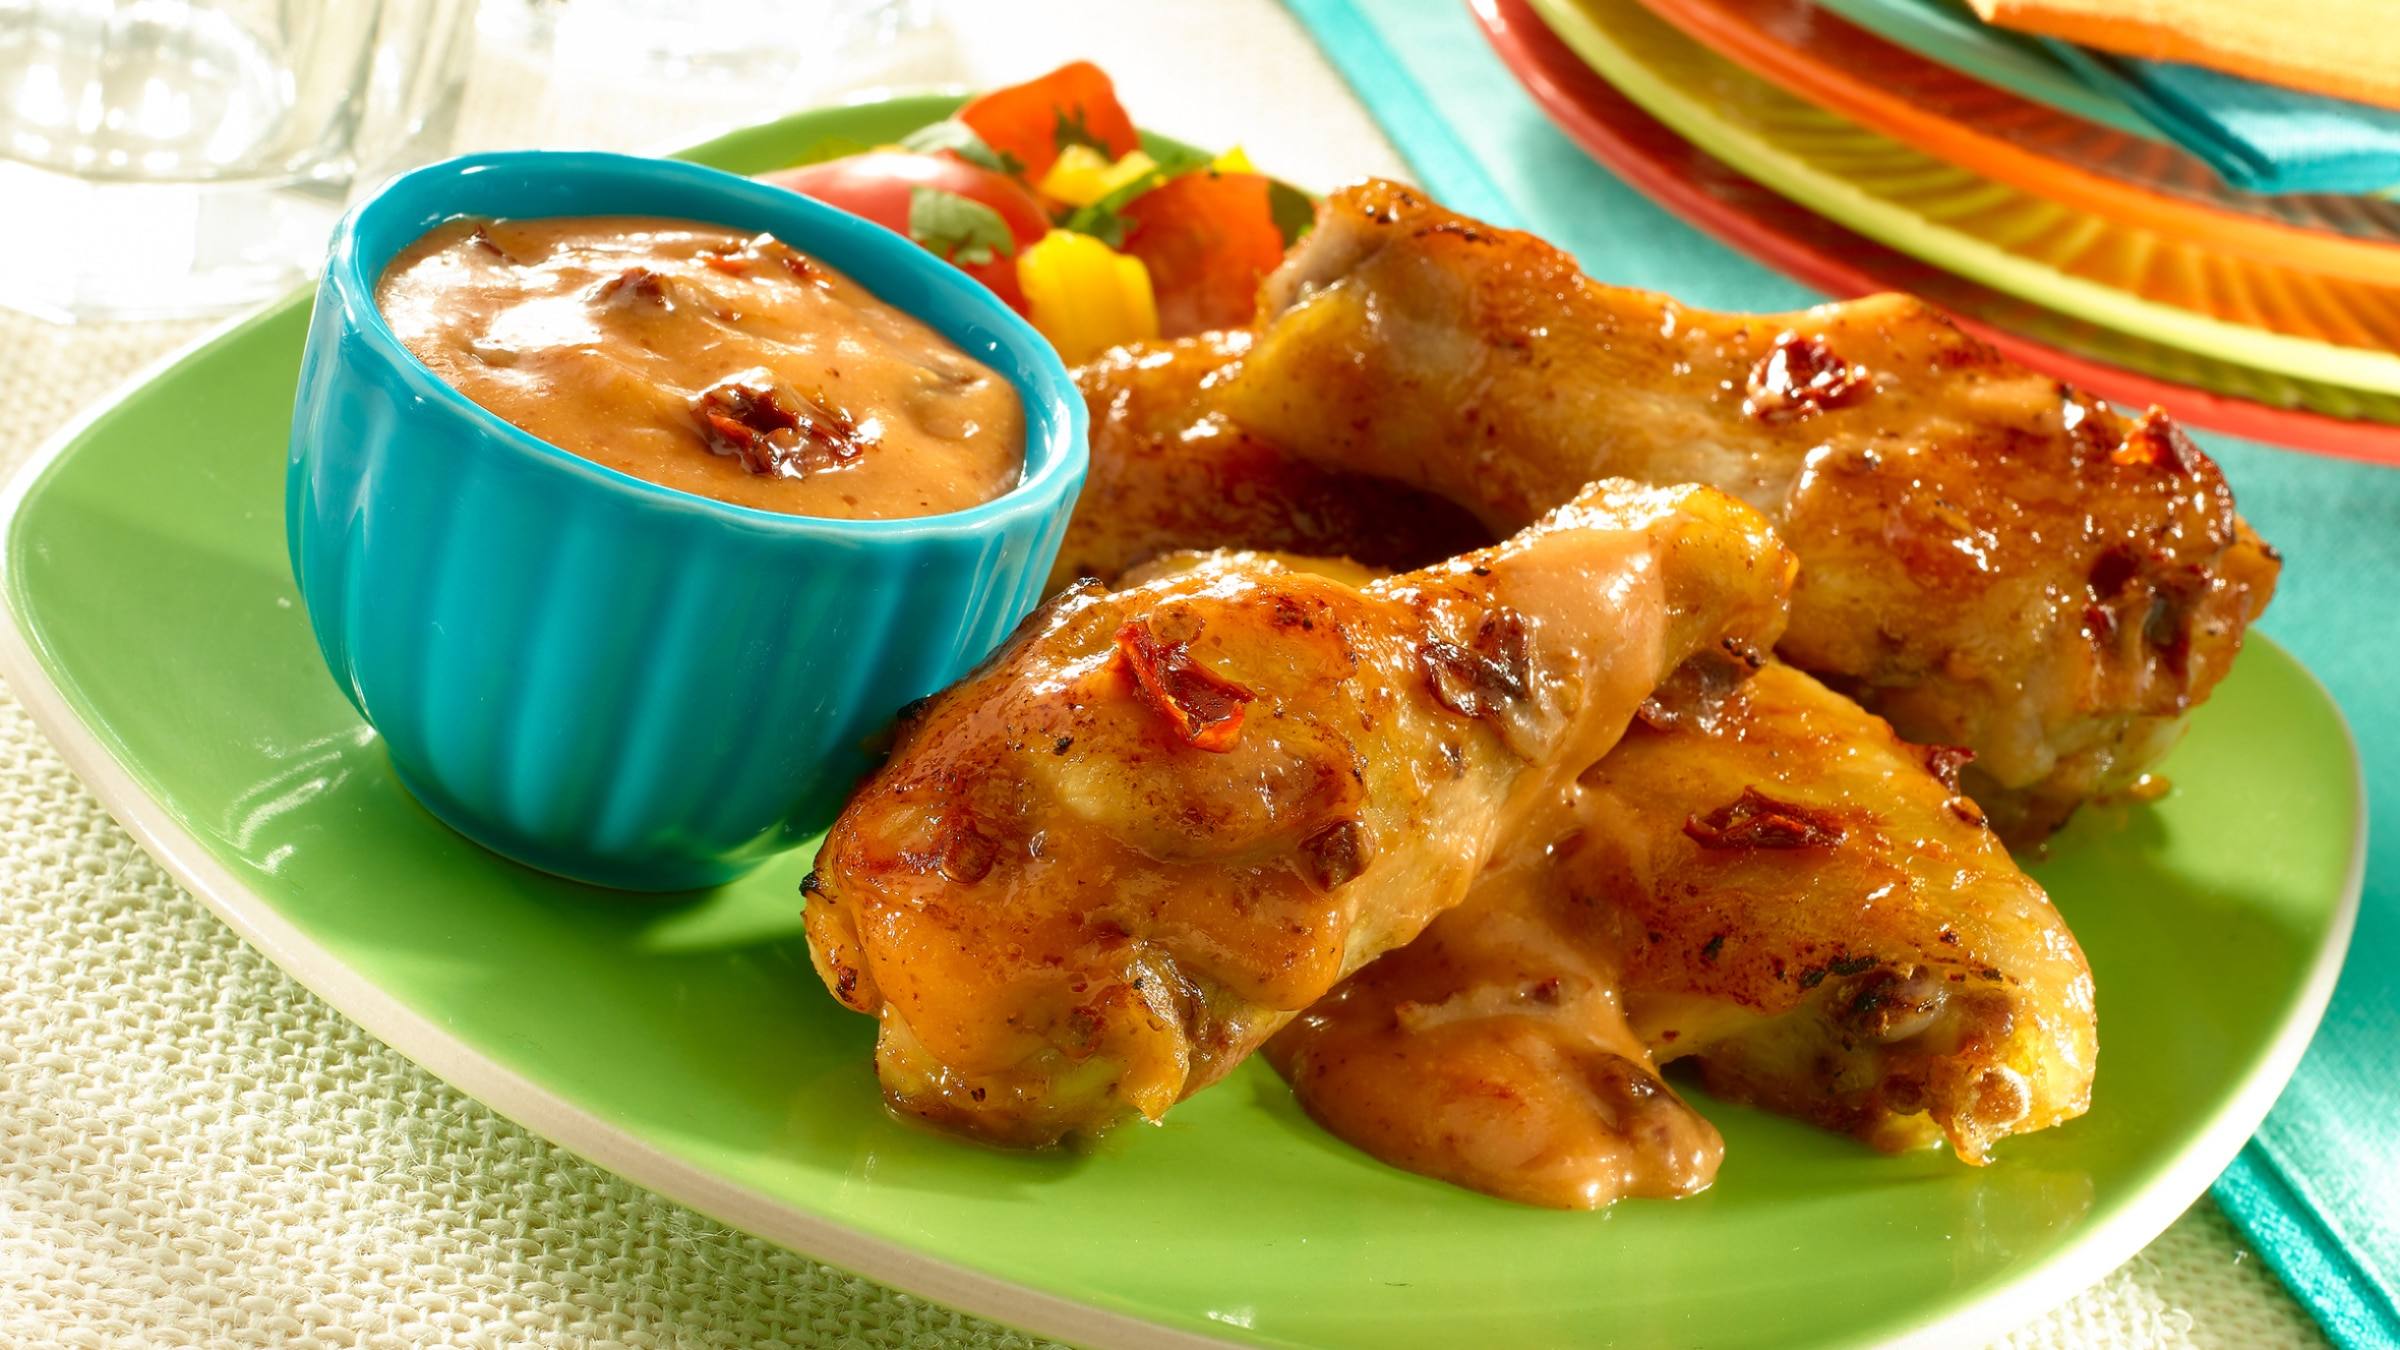 Guava Chipotle Wings with Creamy Dipping Sauce